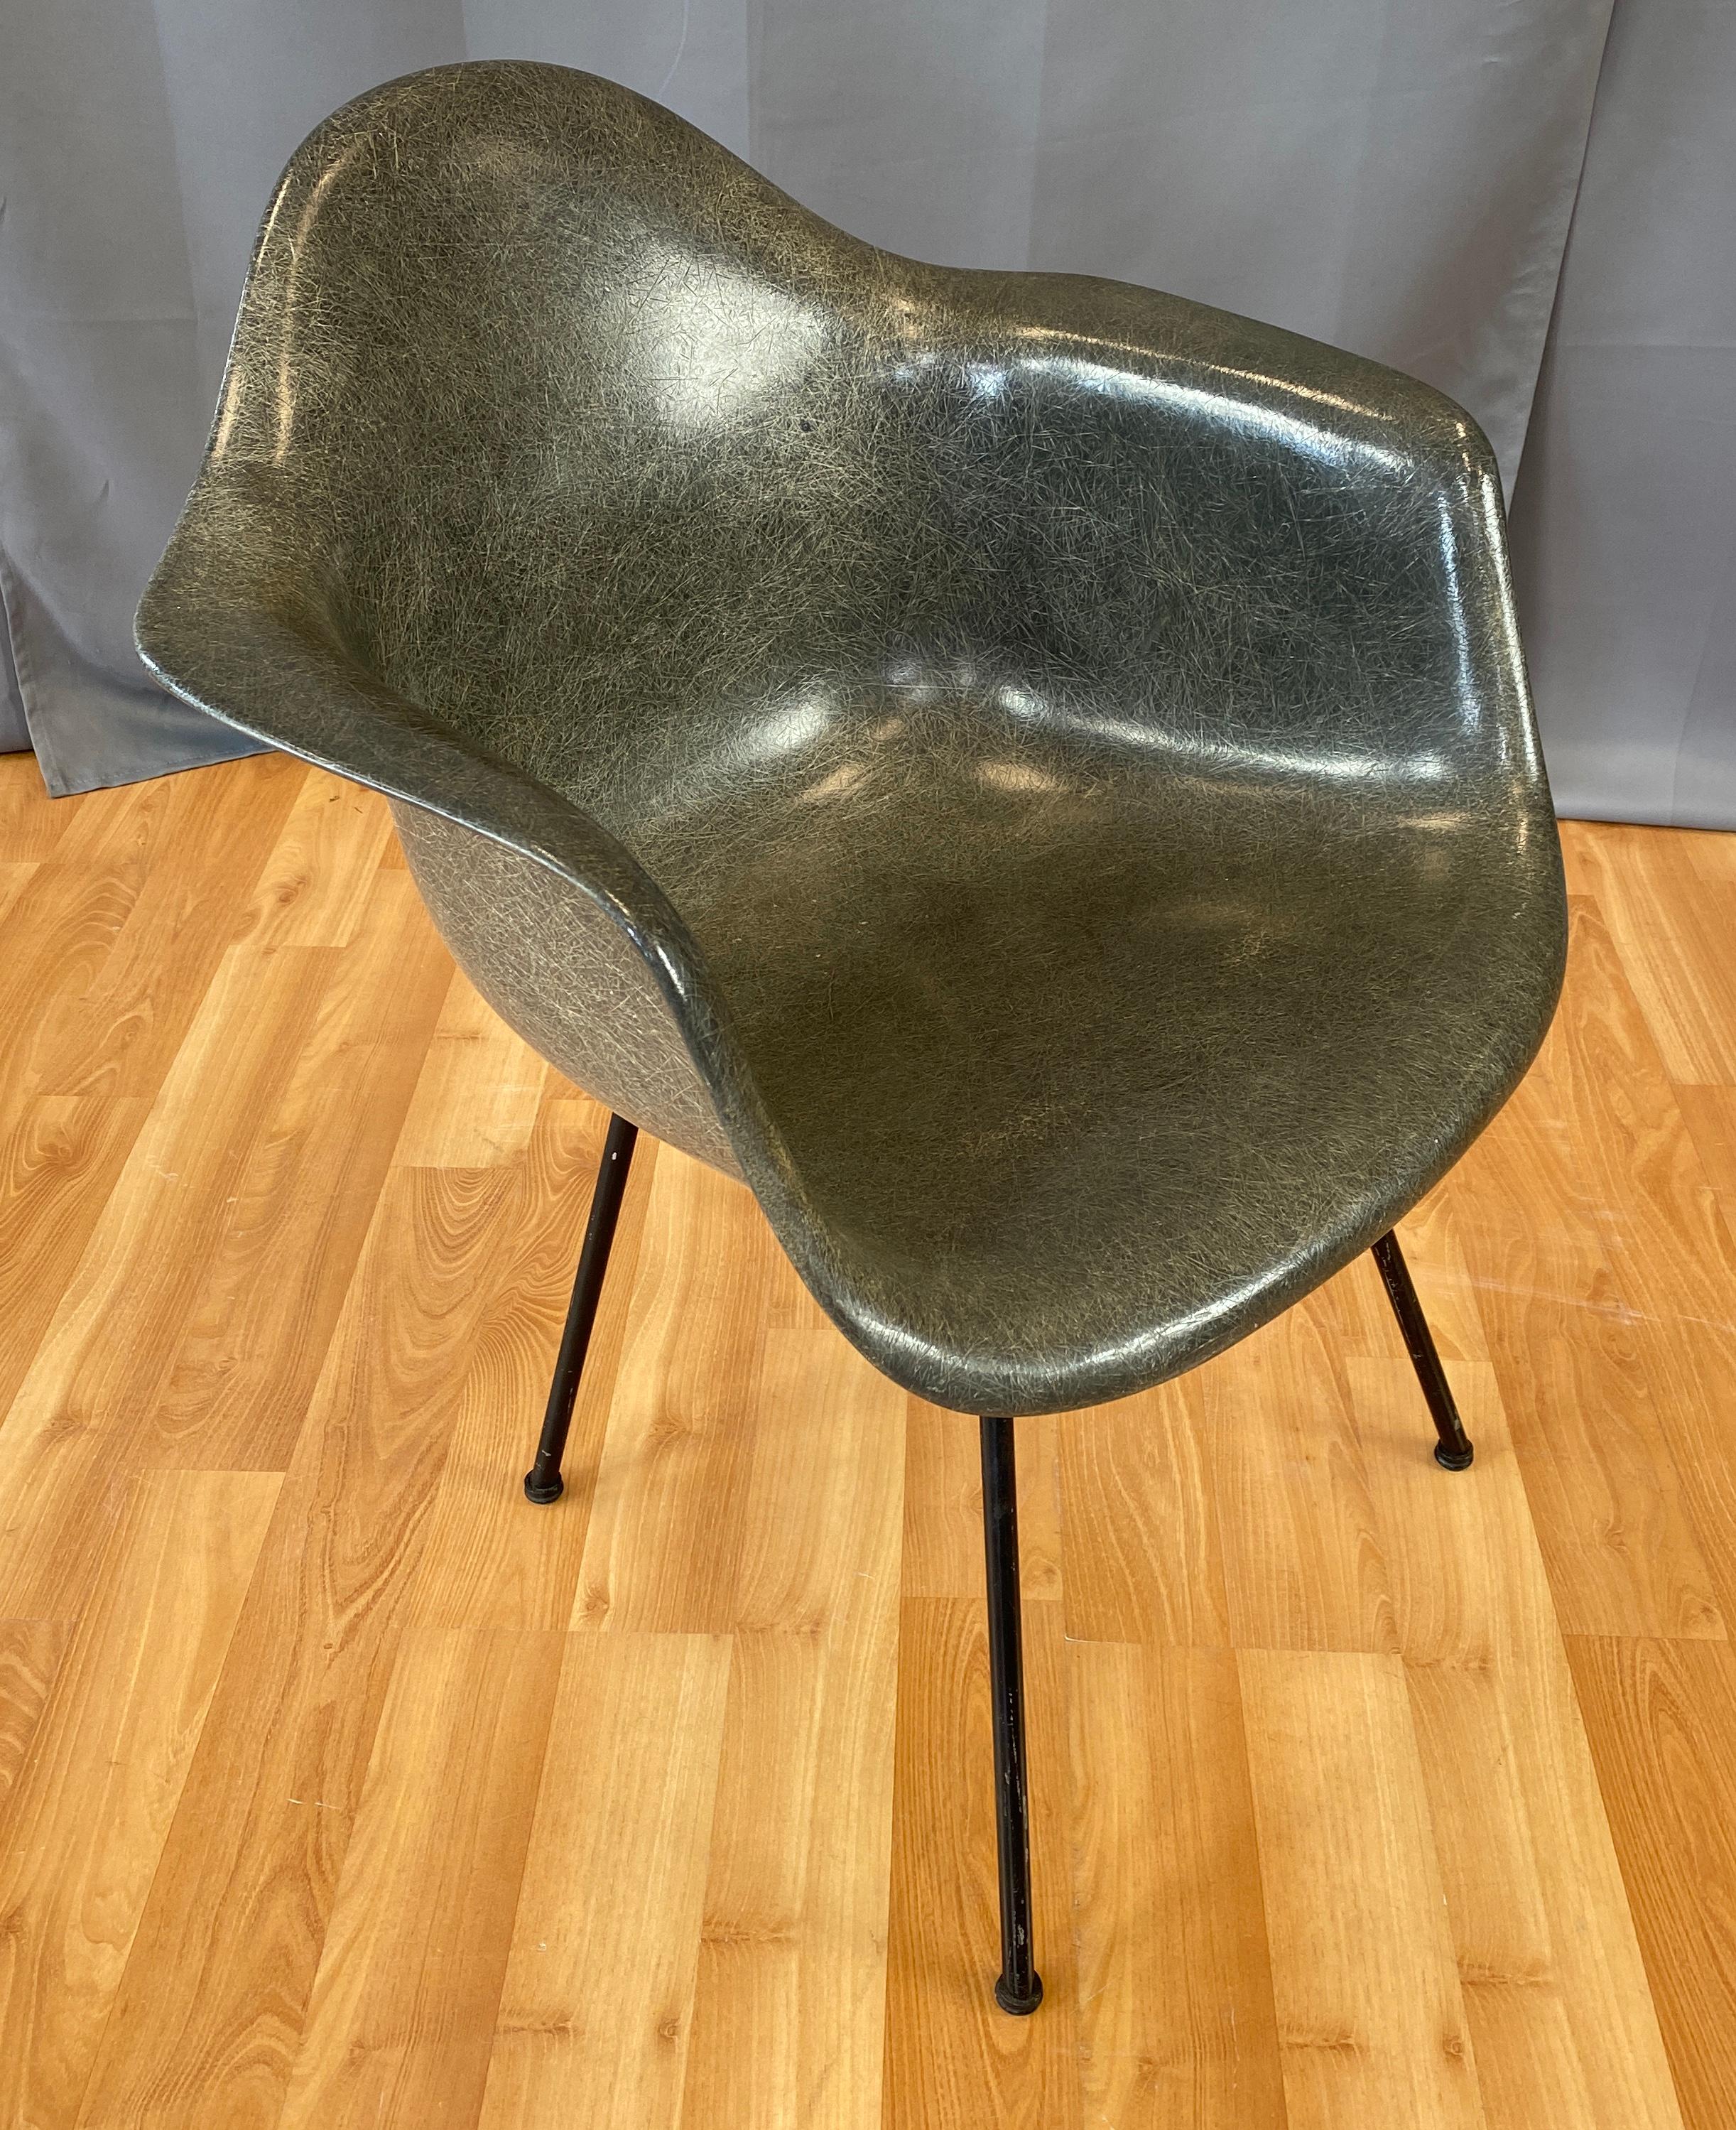 1st Generation Zenith Plastic Rope Edge Chair, Charles Eames for Herman Miller A 9